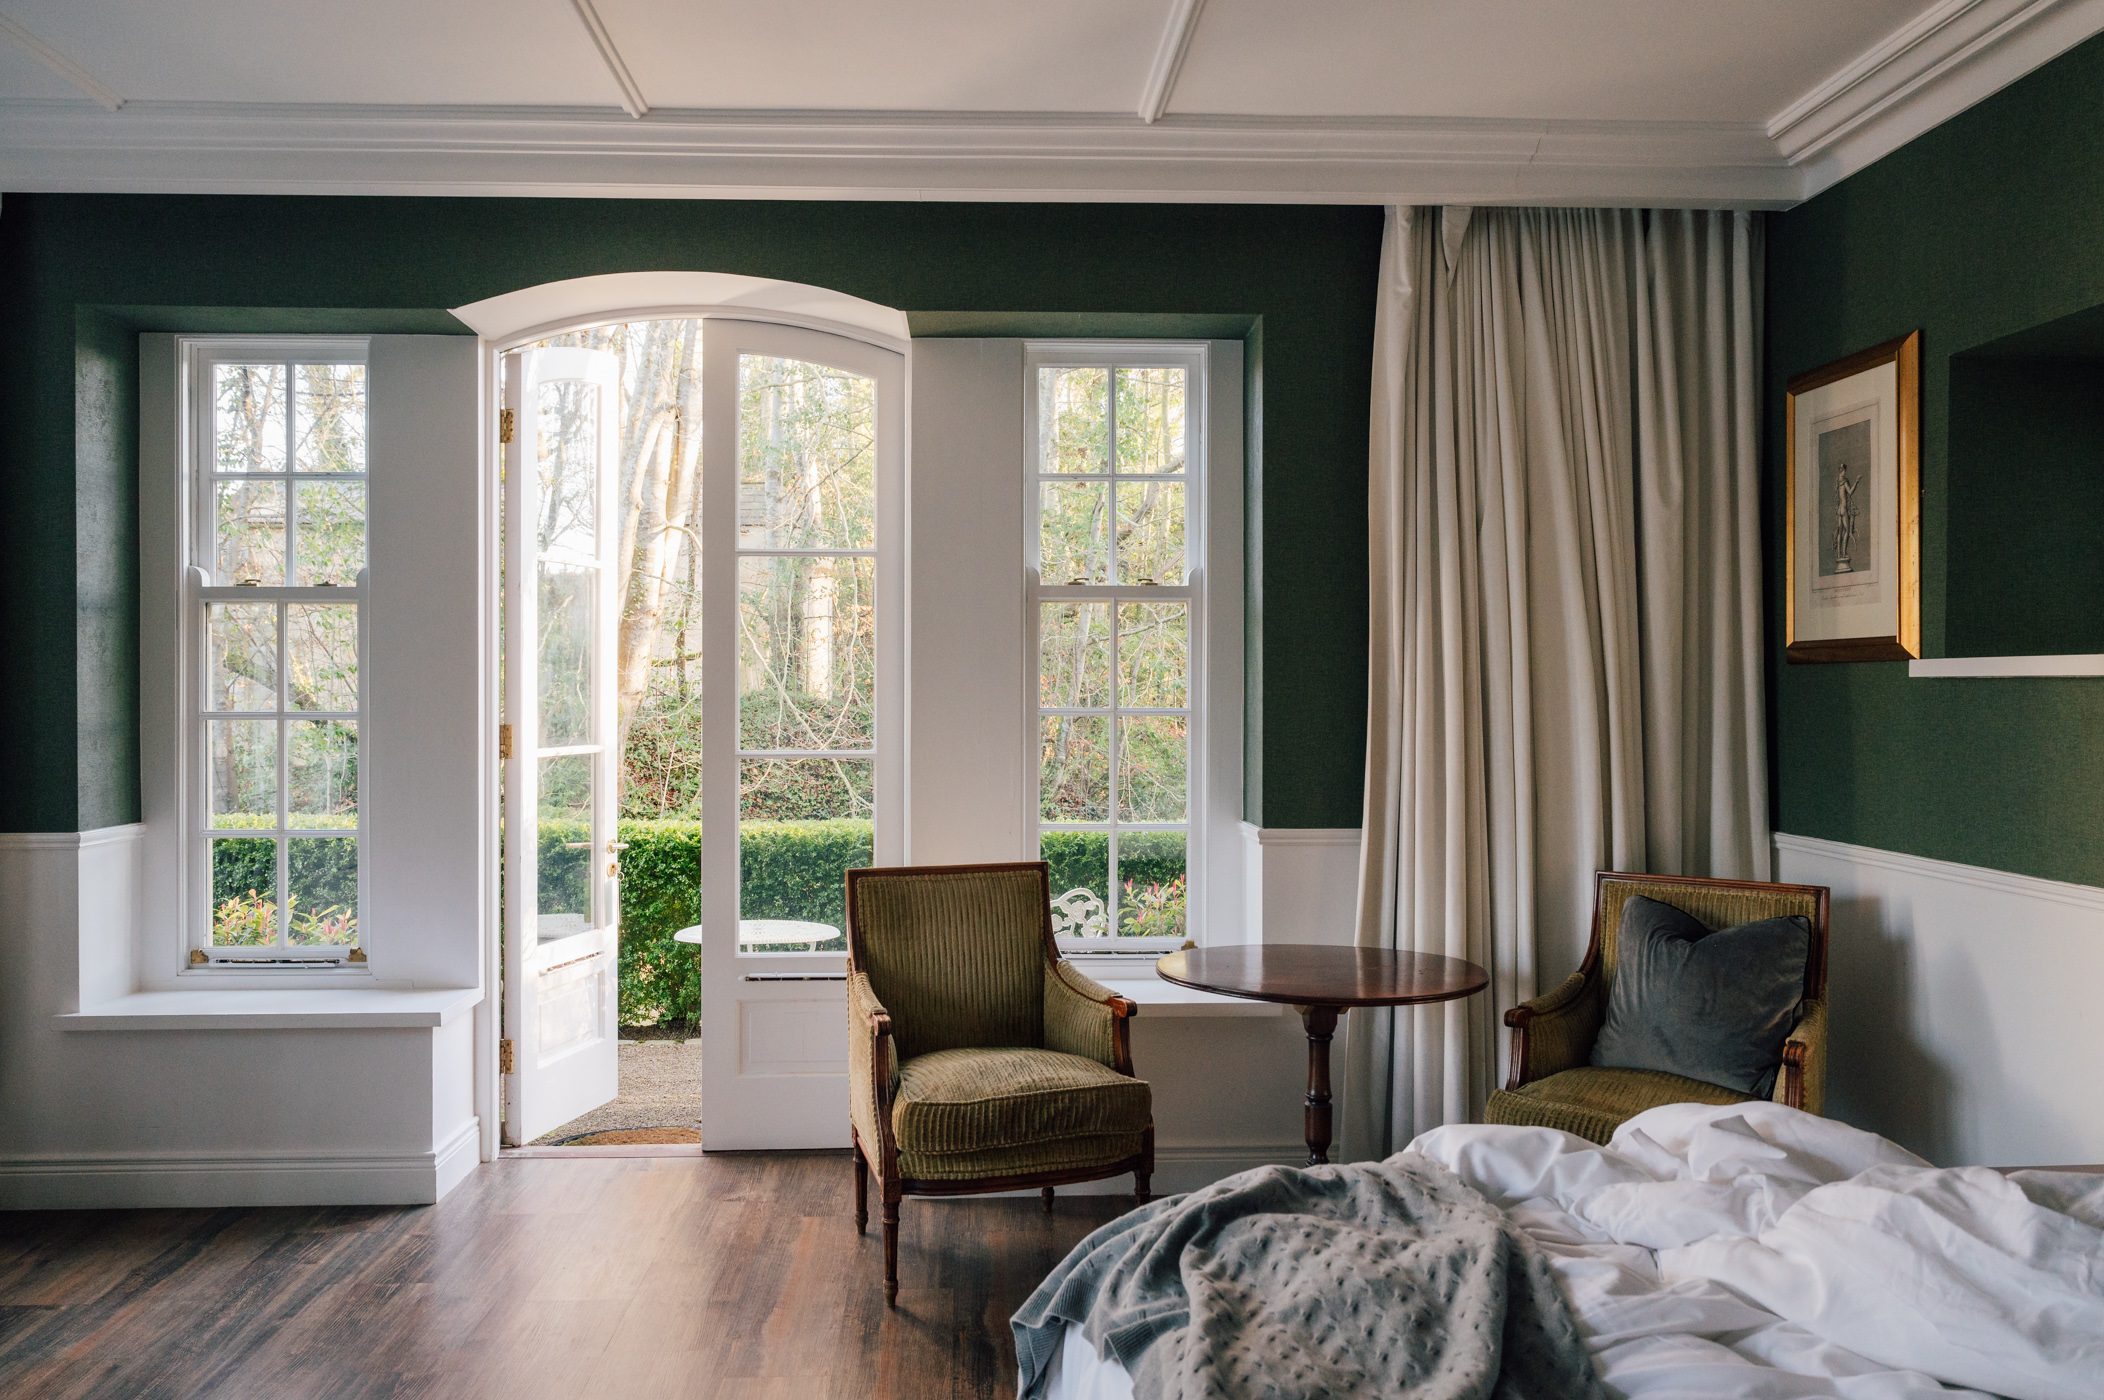 Where to stay in Ireland: Heritage and boutique stays with Ireland's Blue Book